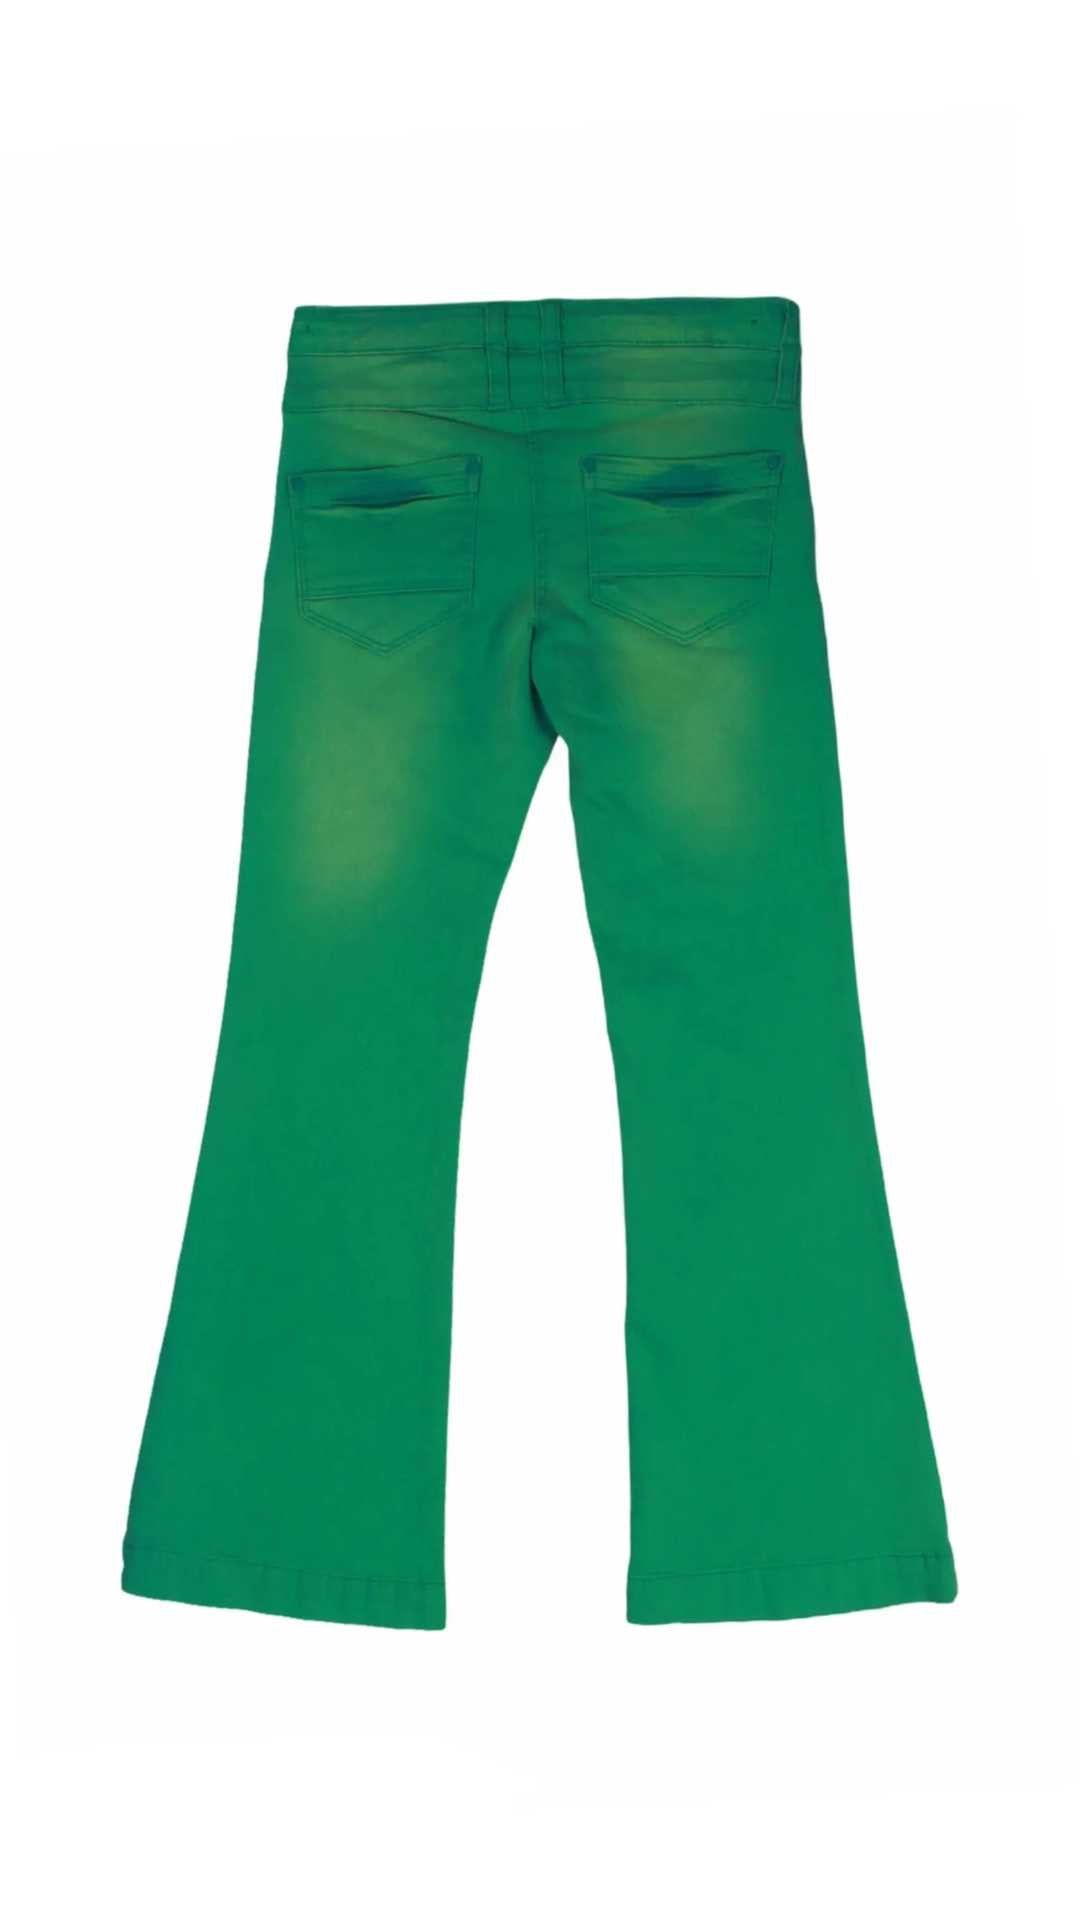 Jeans in Green color for girls | FASHIOLA INDIA